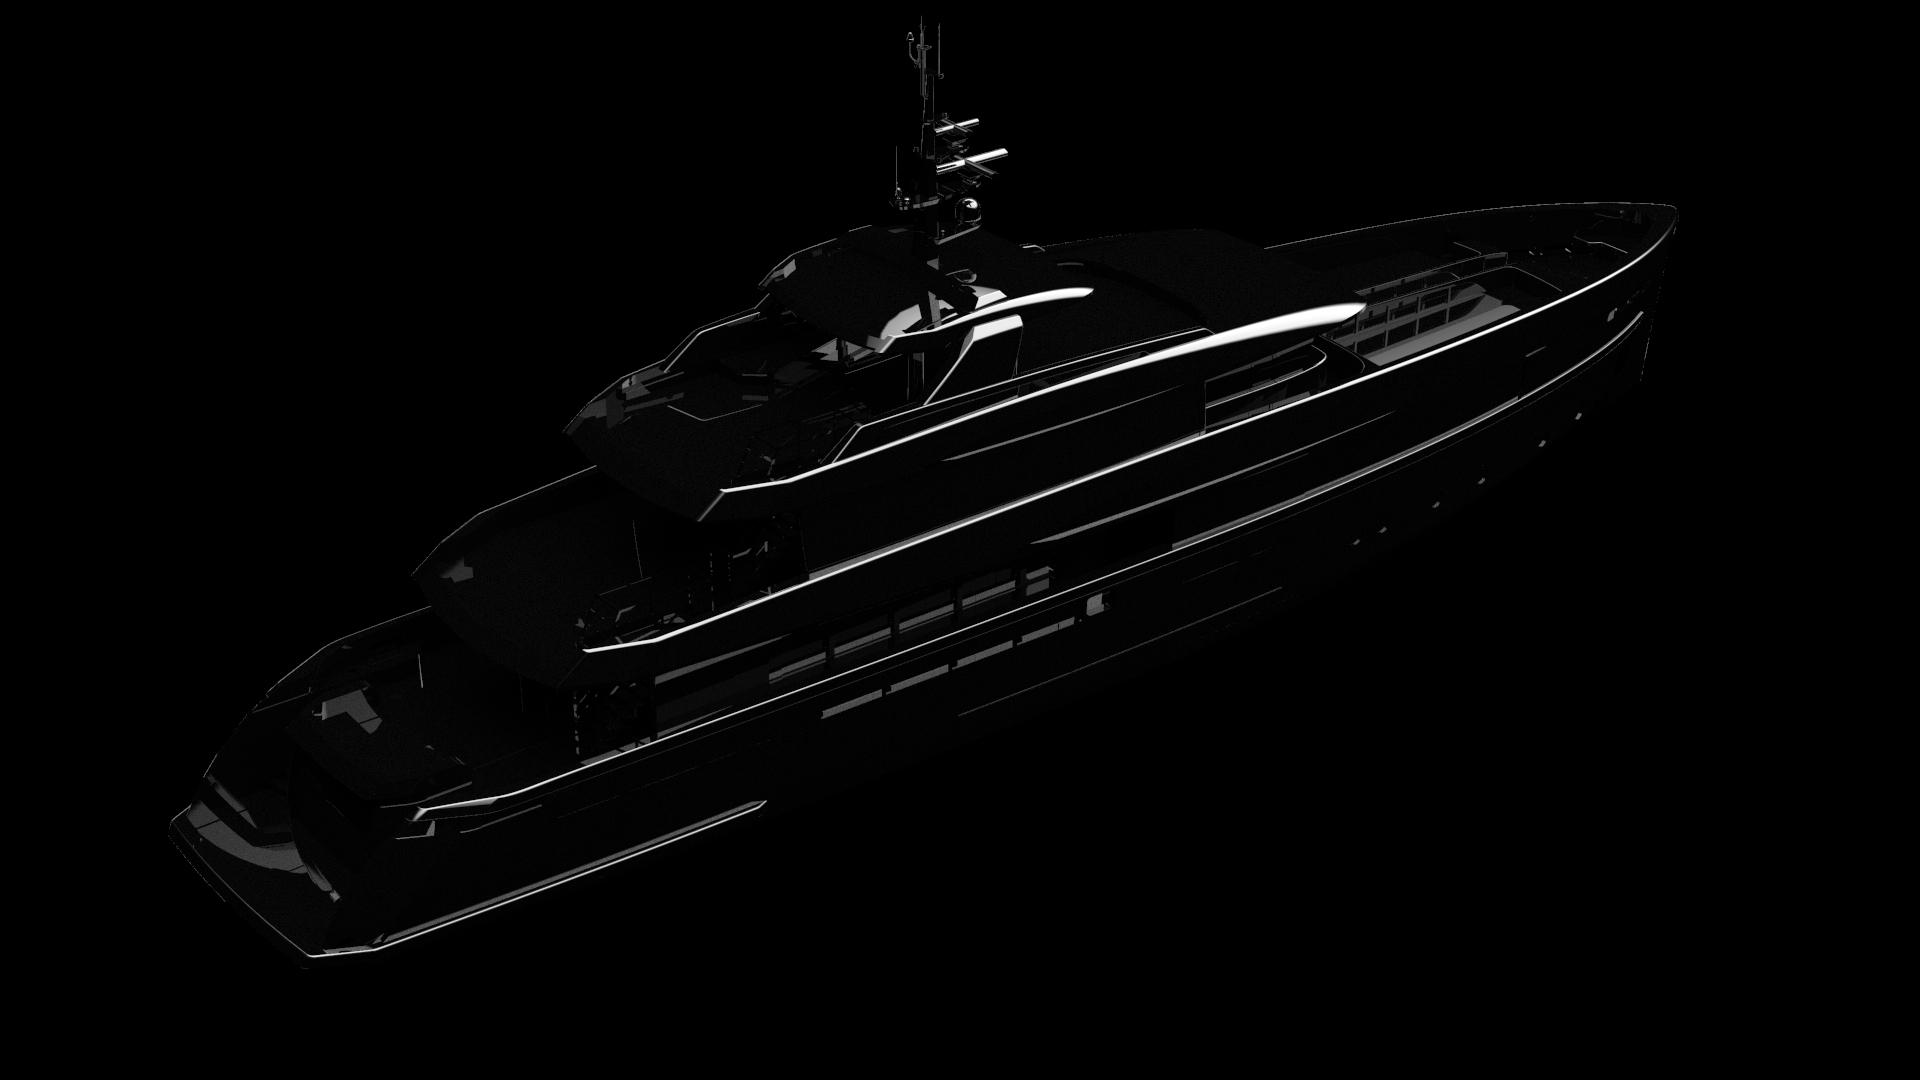 Admiral signs a new 46m Superyacht